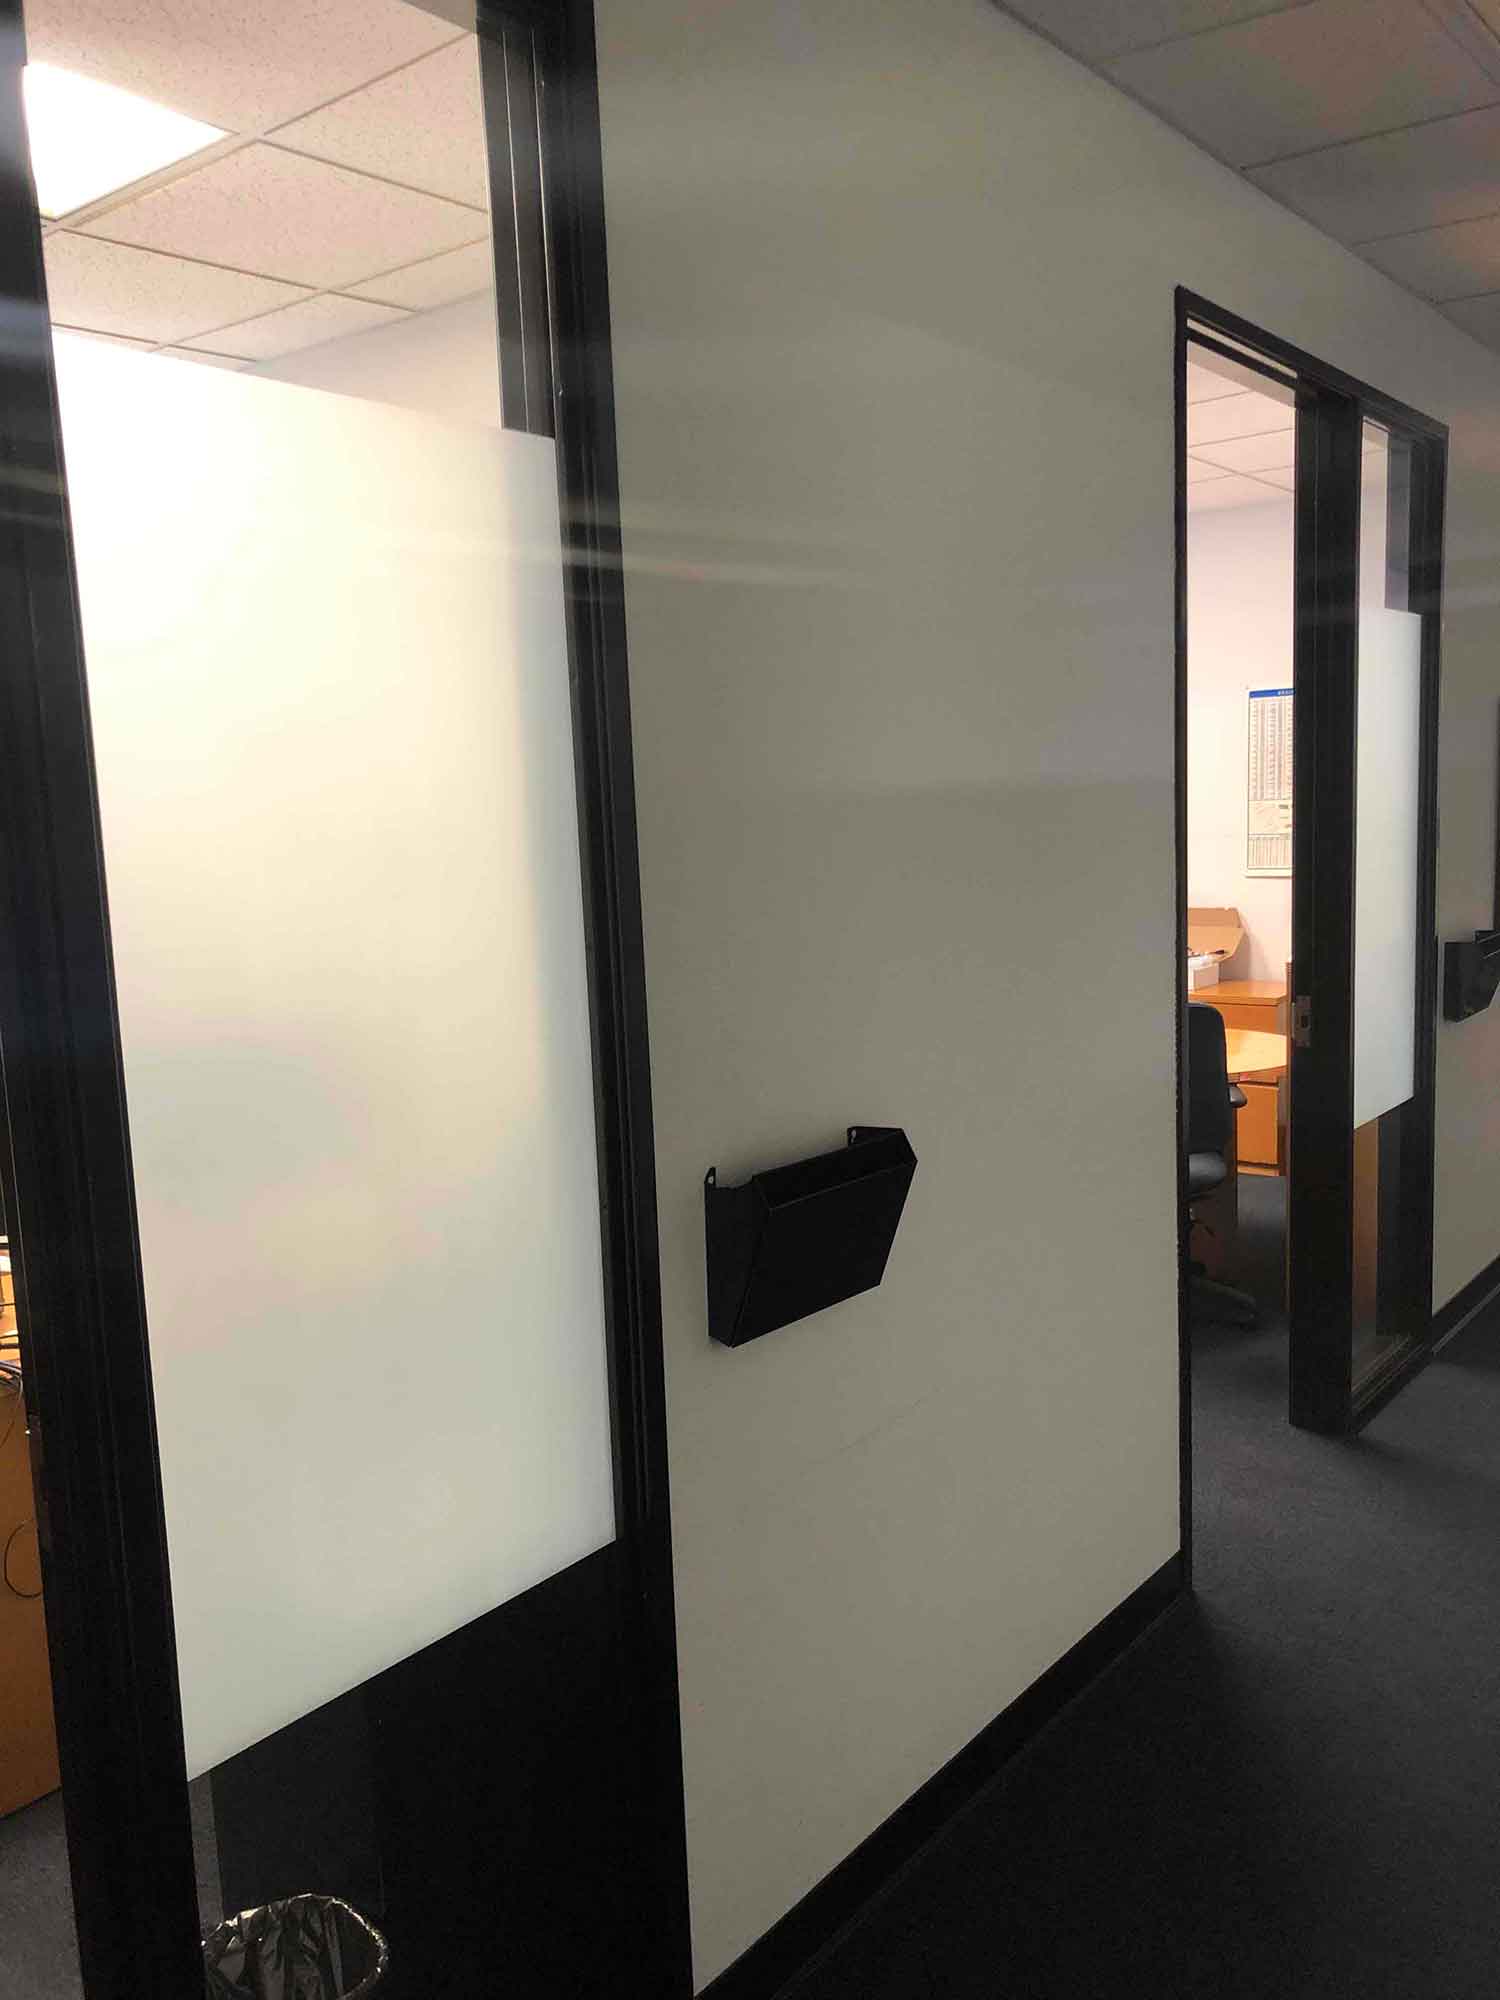 A Fremont, CA Office Gets More Privacy with Frosted Window Tint by ClimatePro